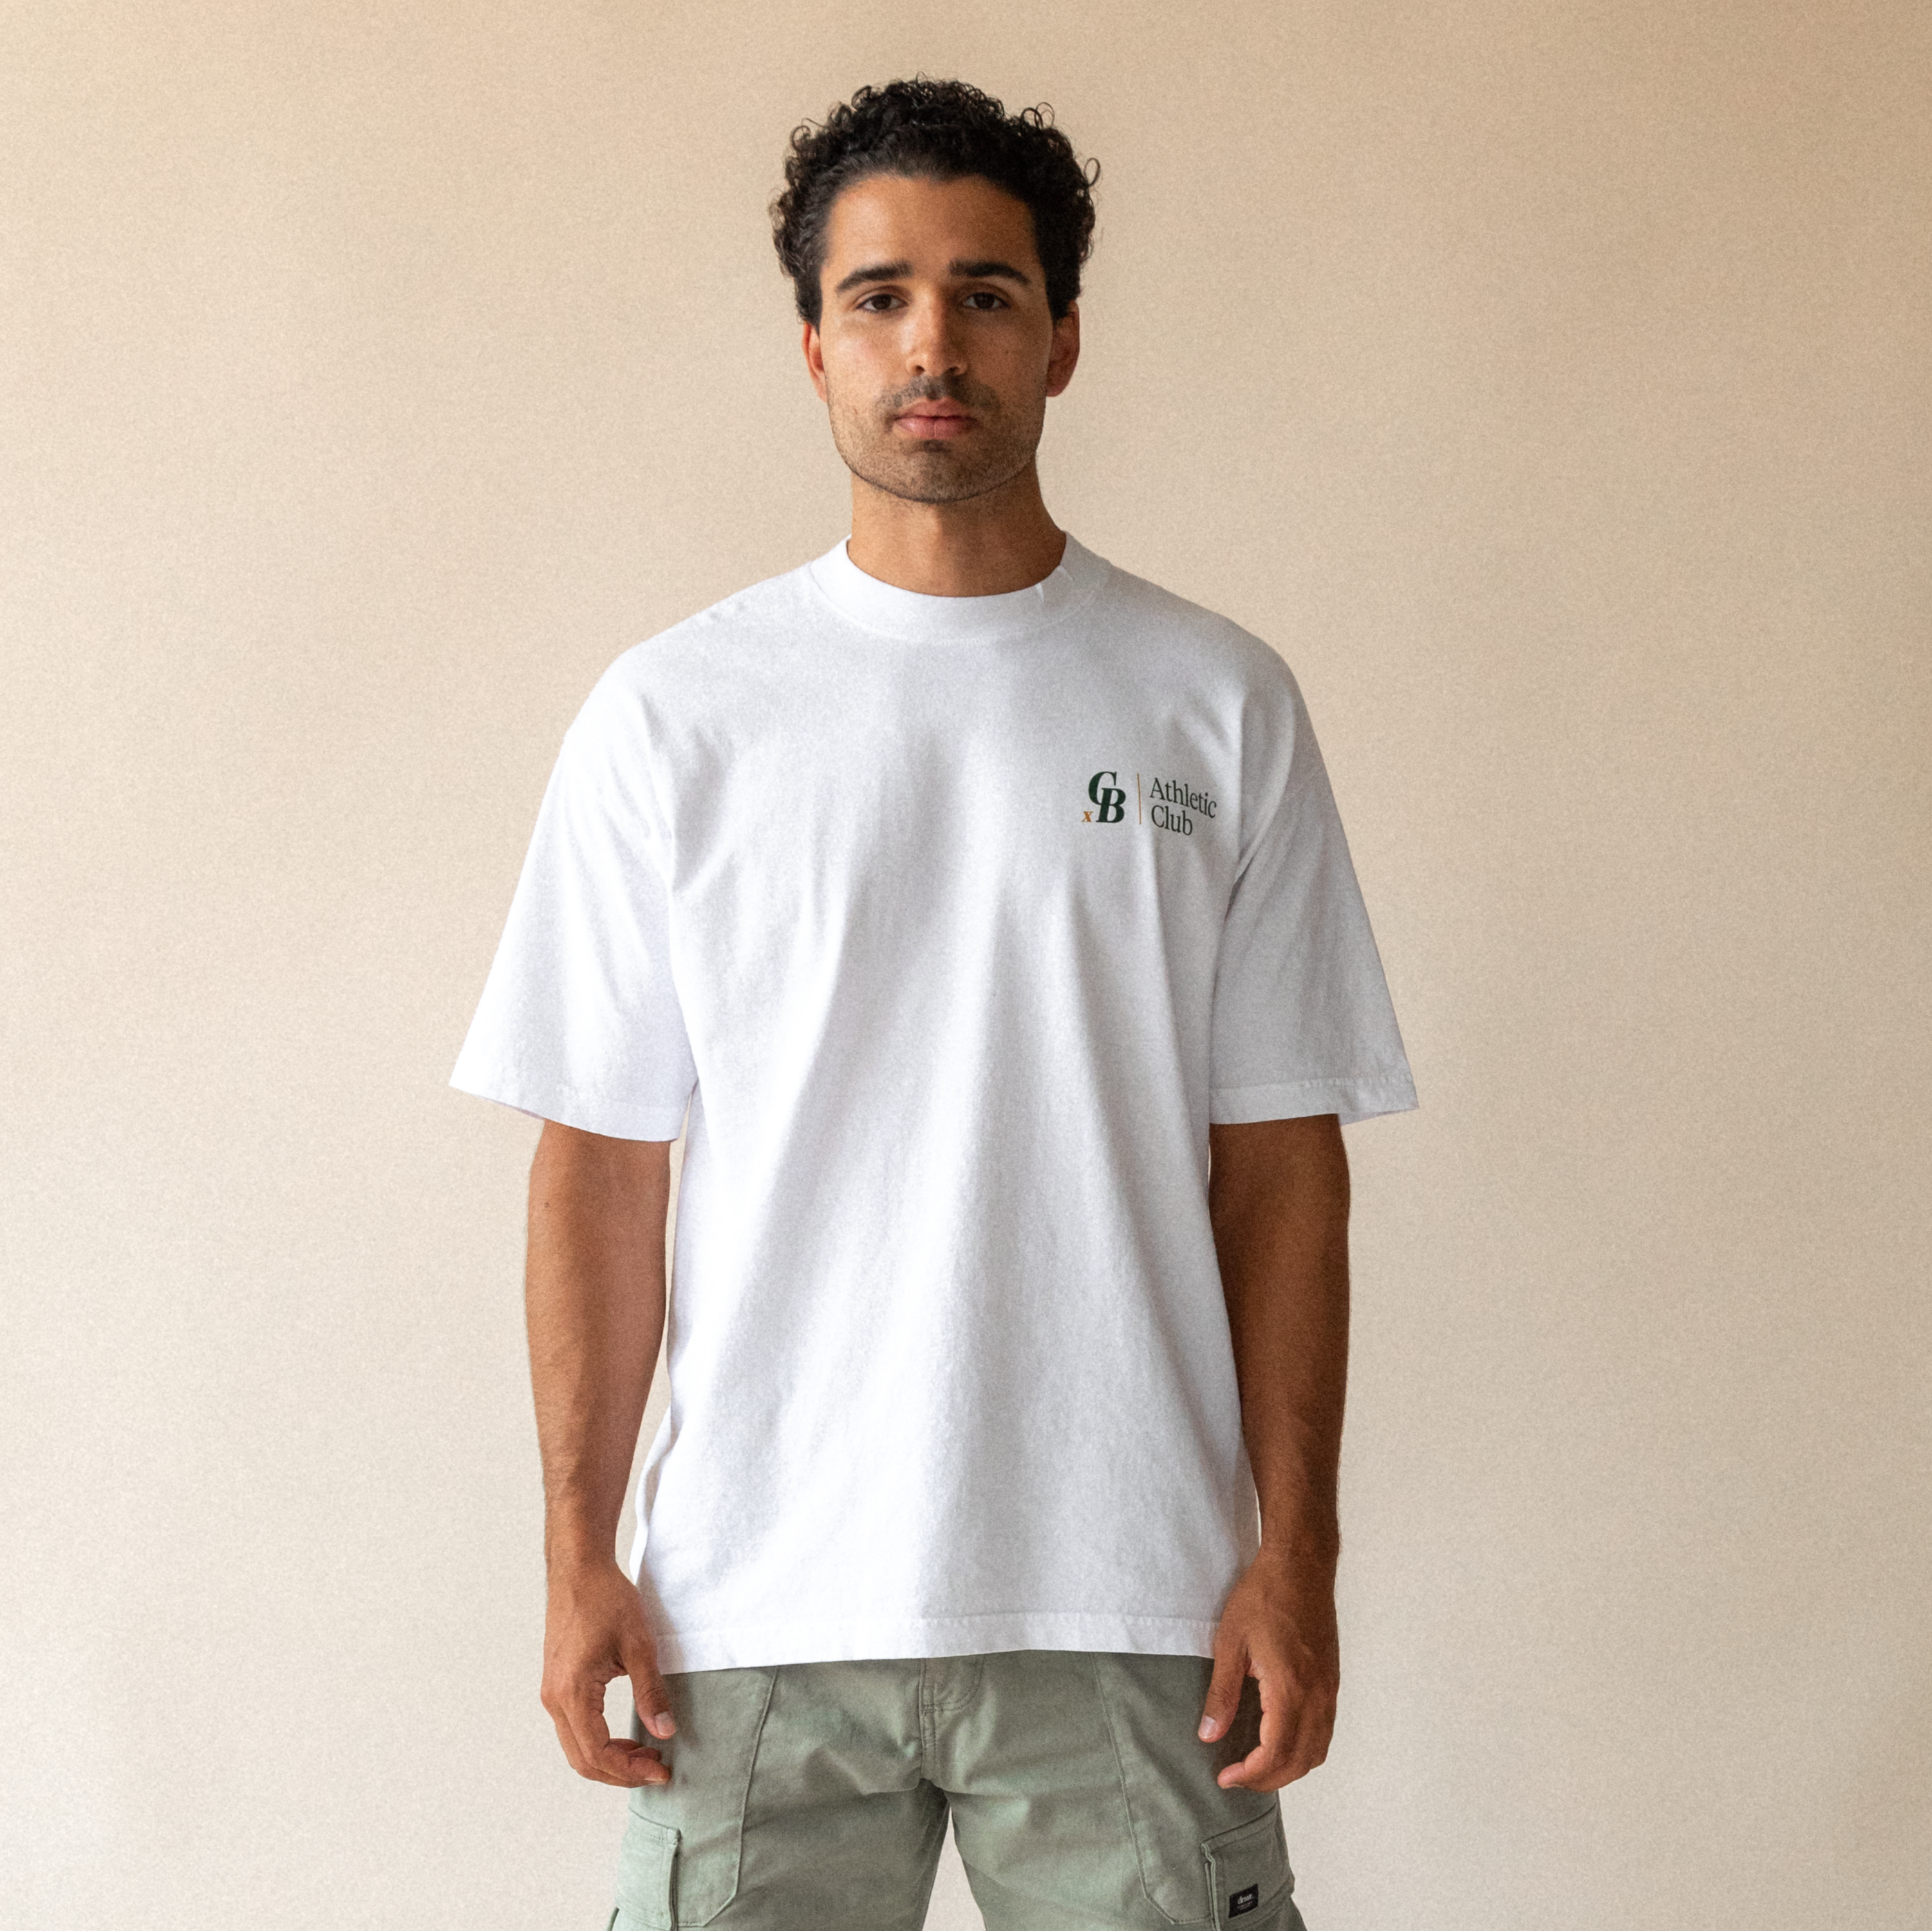 The Athletic Club Tee // White